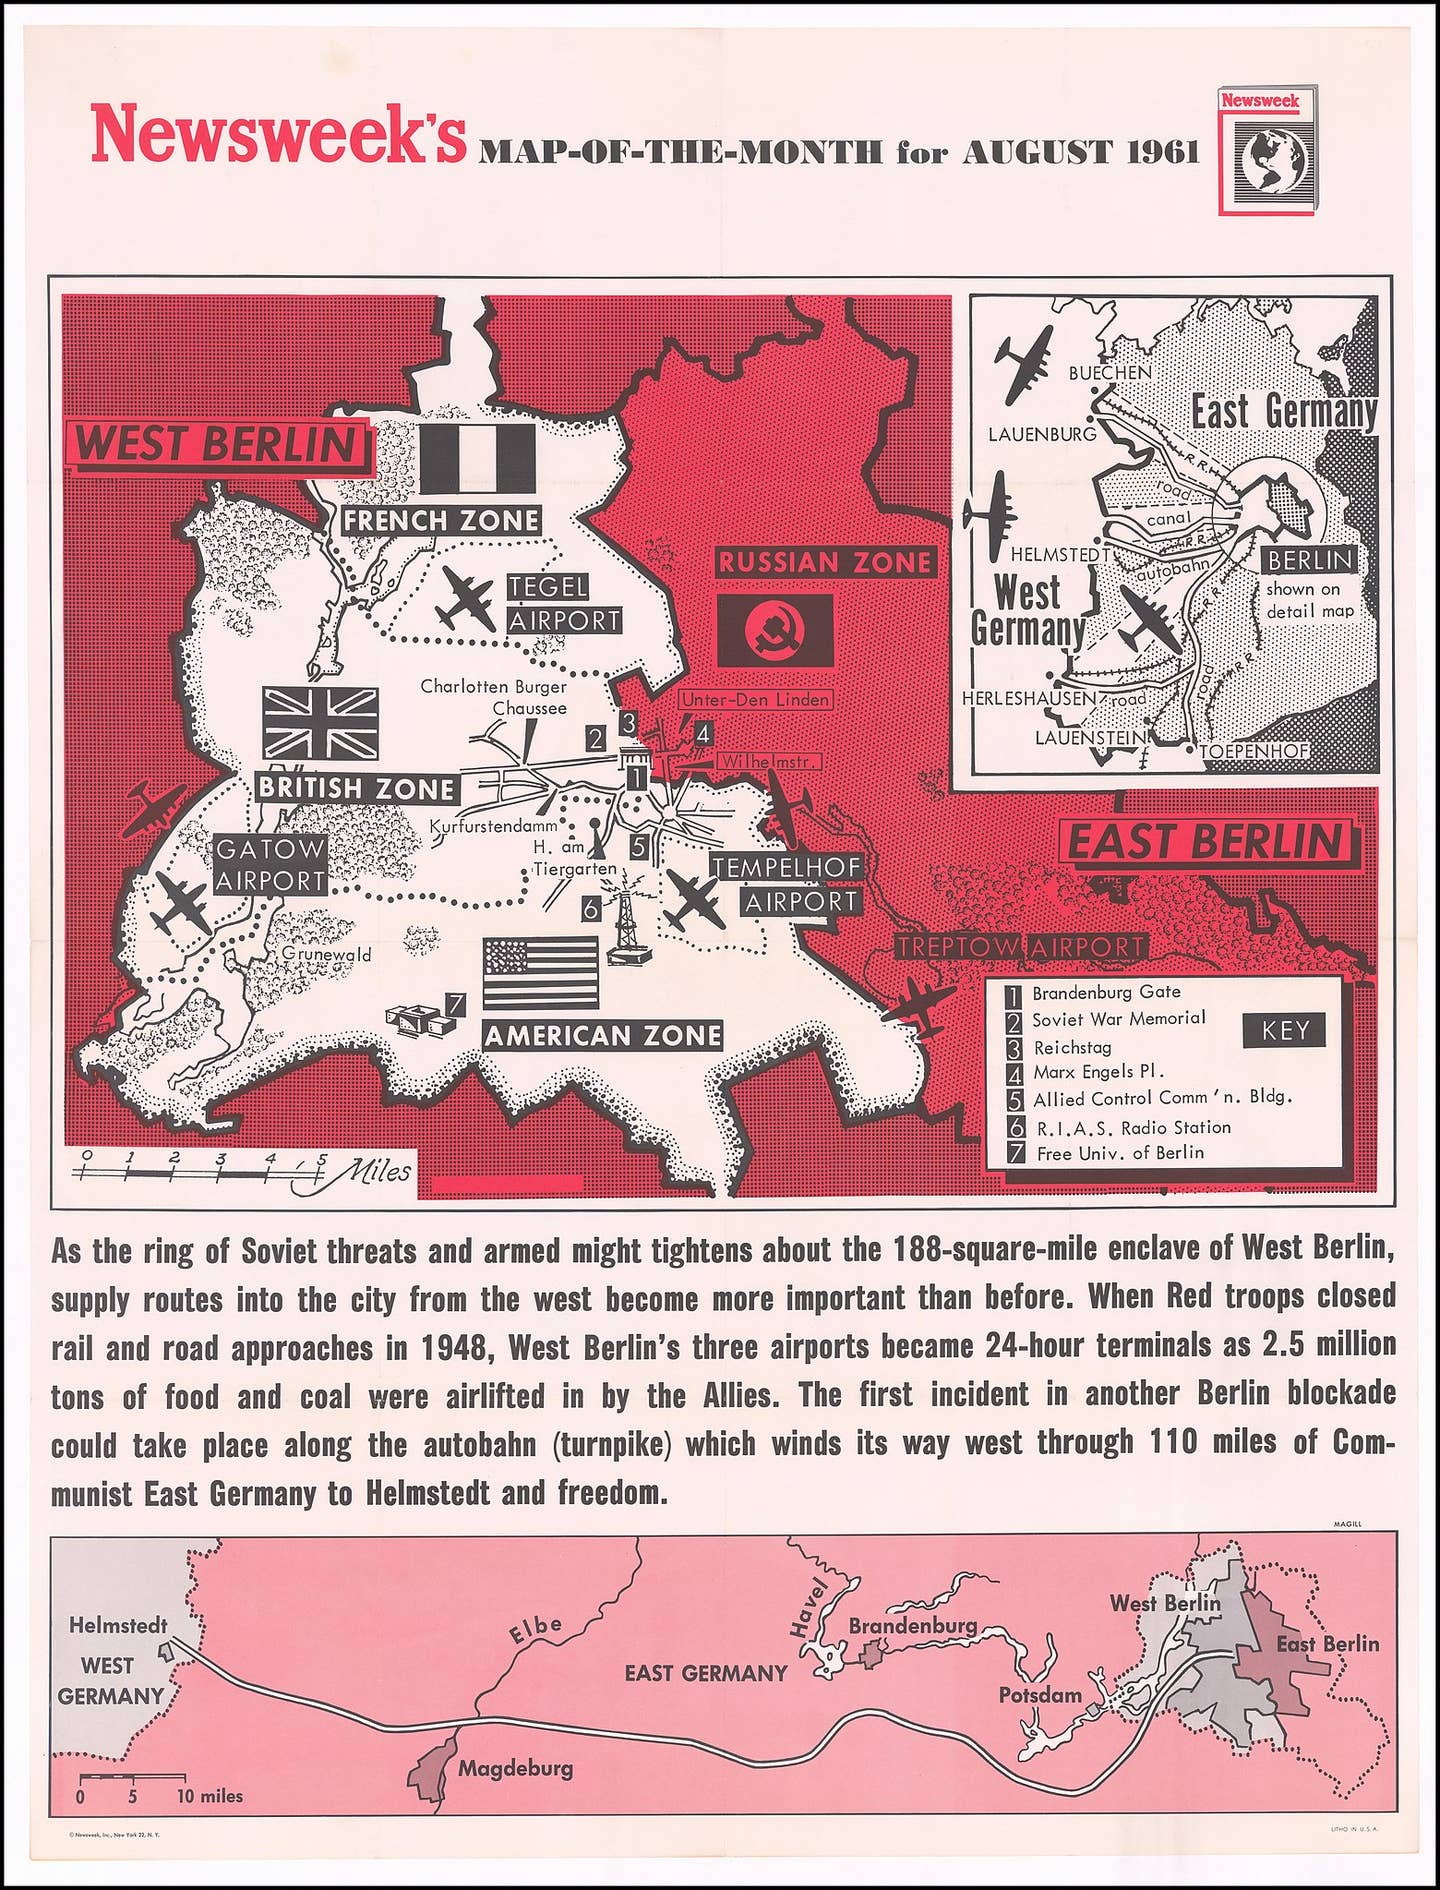 message-editor%2F1631646524035-august_1961_newsweek_map_of_the_occupation_zones_of_berlin.jpg